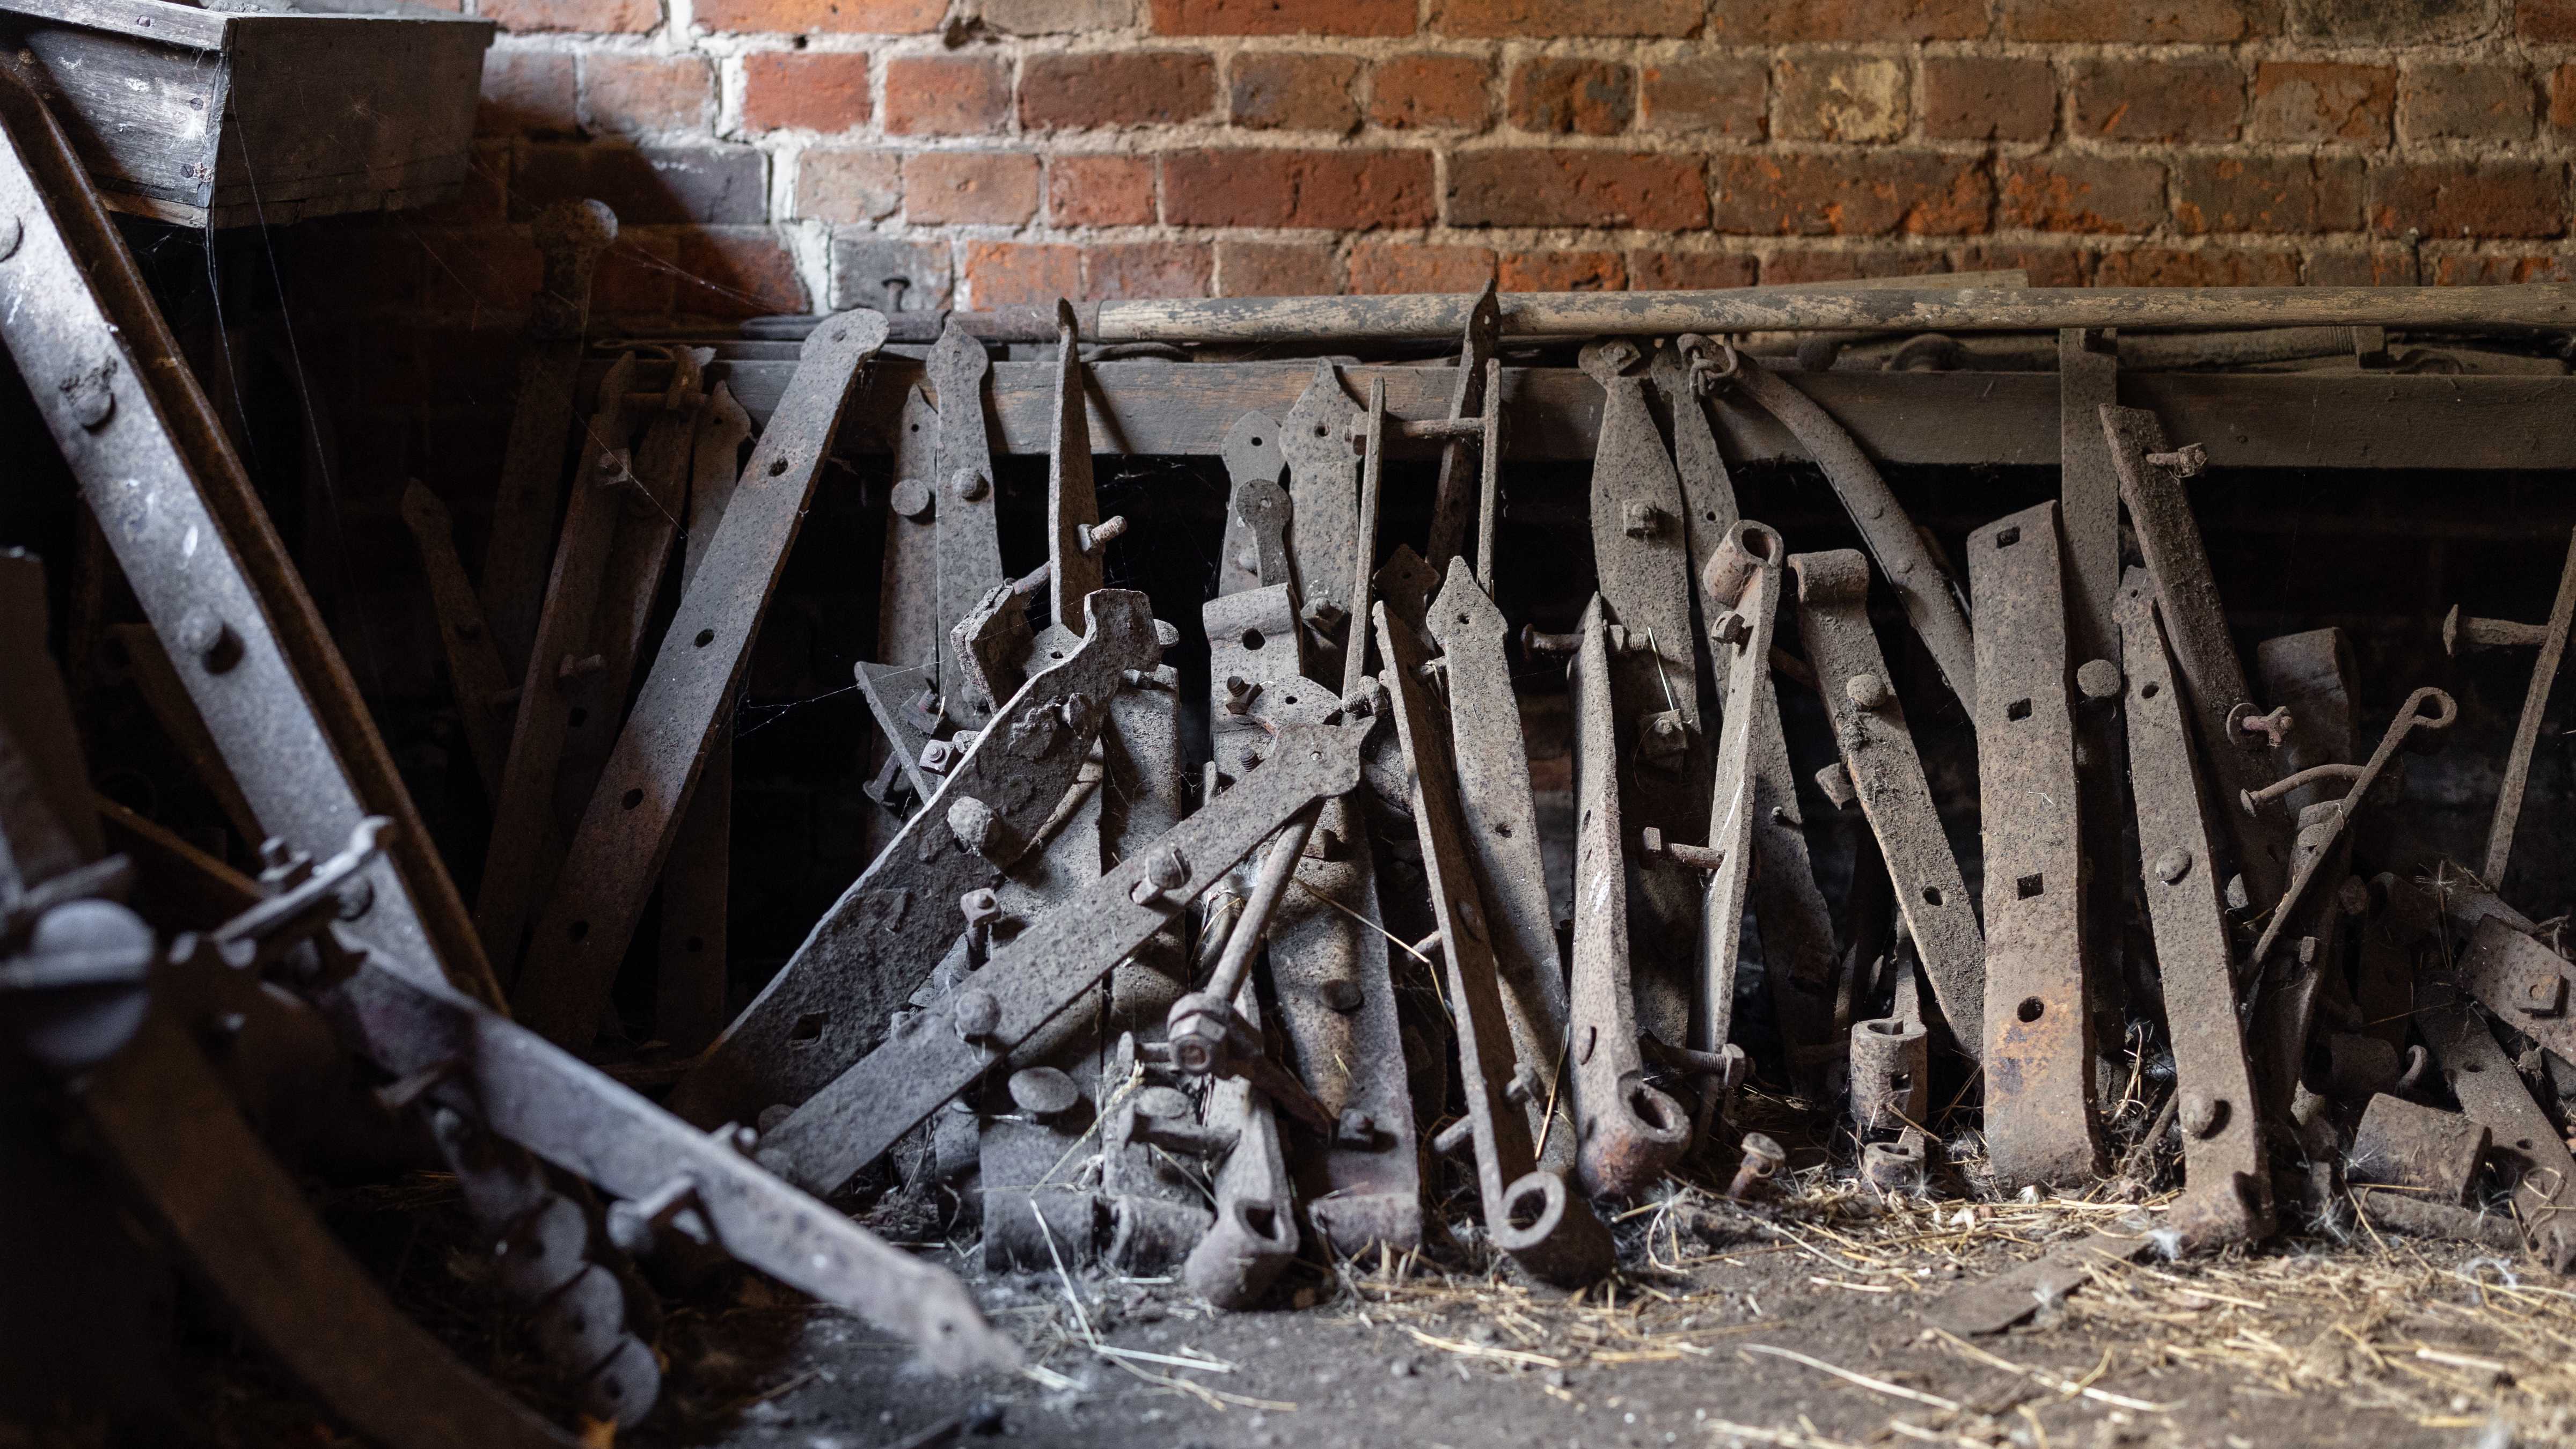 A collection of old metal gate hinges leaning on the brick wall of the Blacksmiths shop. Some of the hinges have metal bolts in them. Photo: Kate von Stieglitz / Tourism Australia.